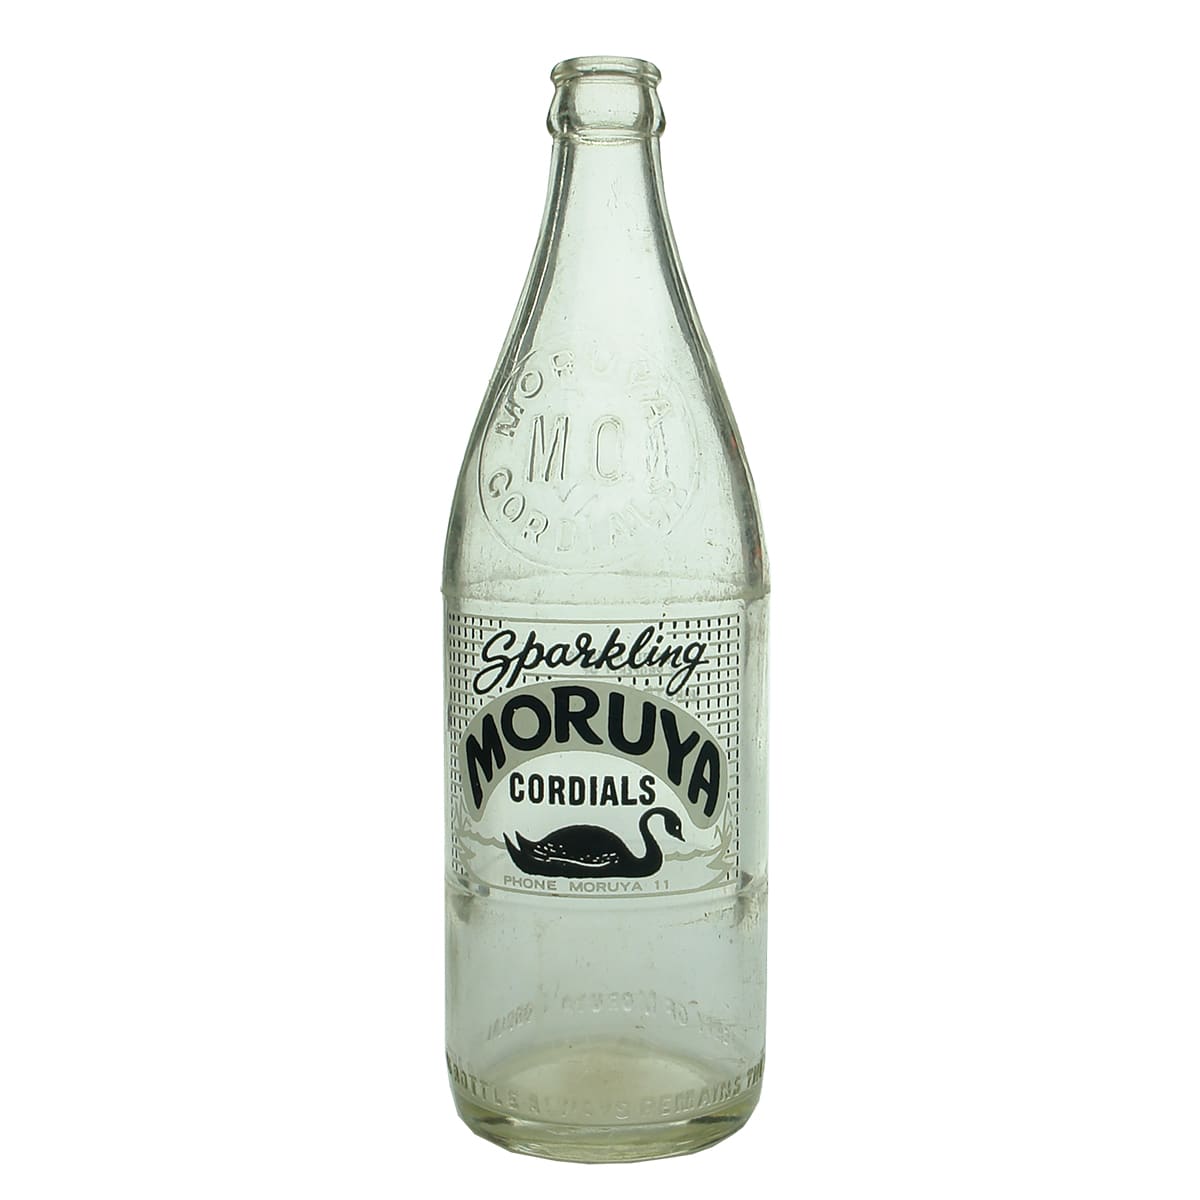 Crown Seal. Moruya Cordials. Ceramic Label. Embossed bottle and black Sparkling. Clear. 24 oz. (New South Wales)